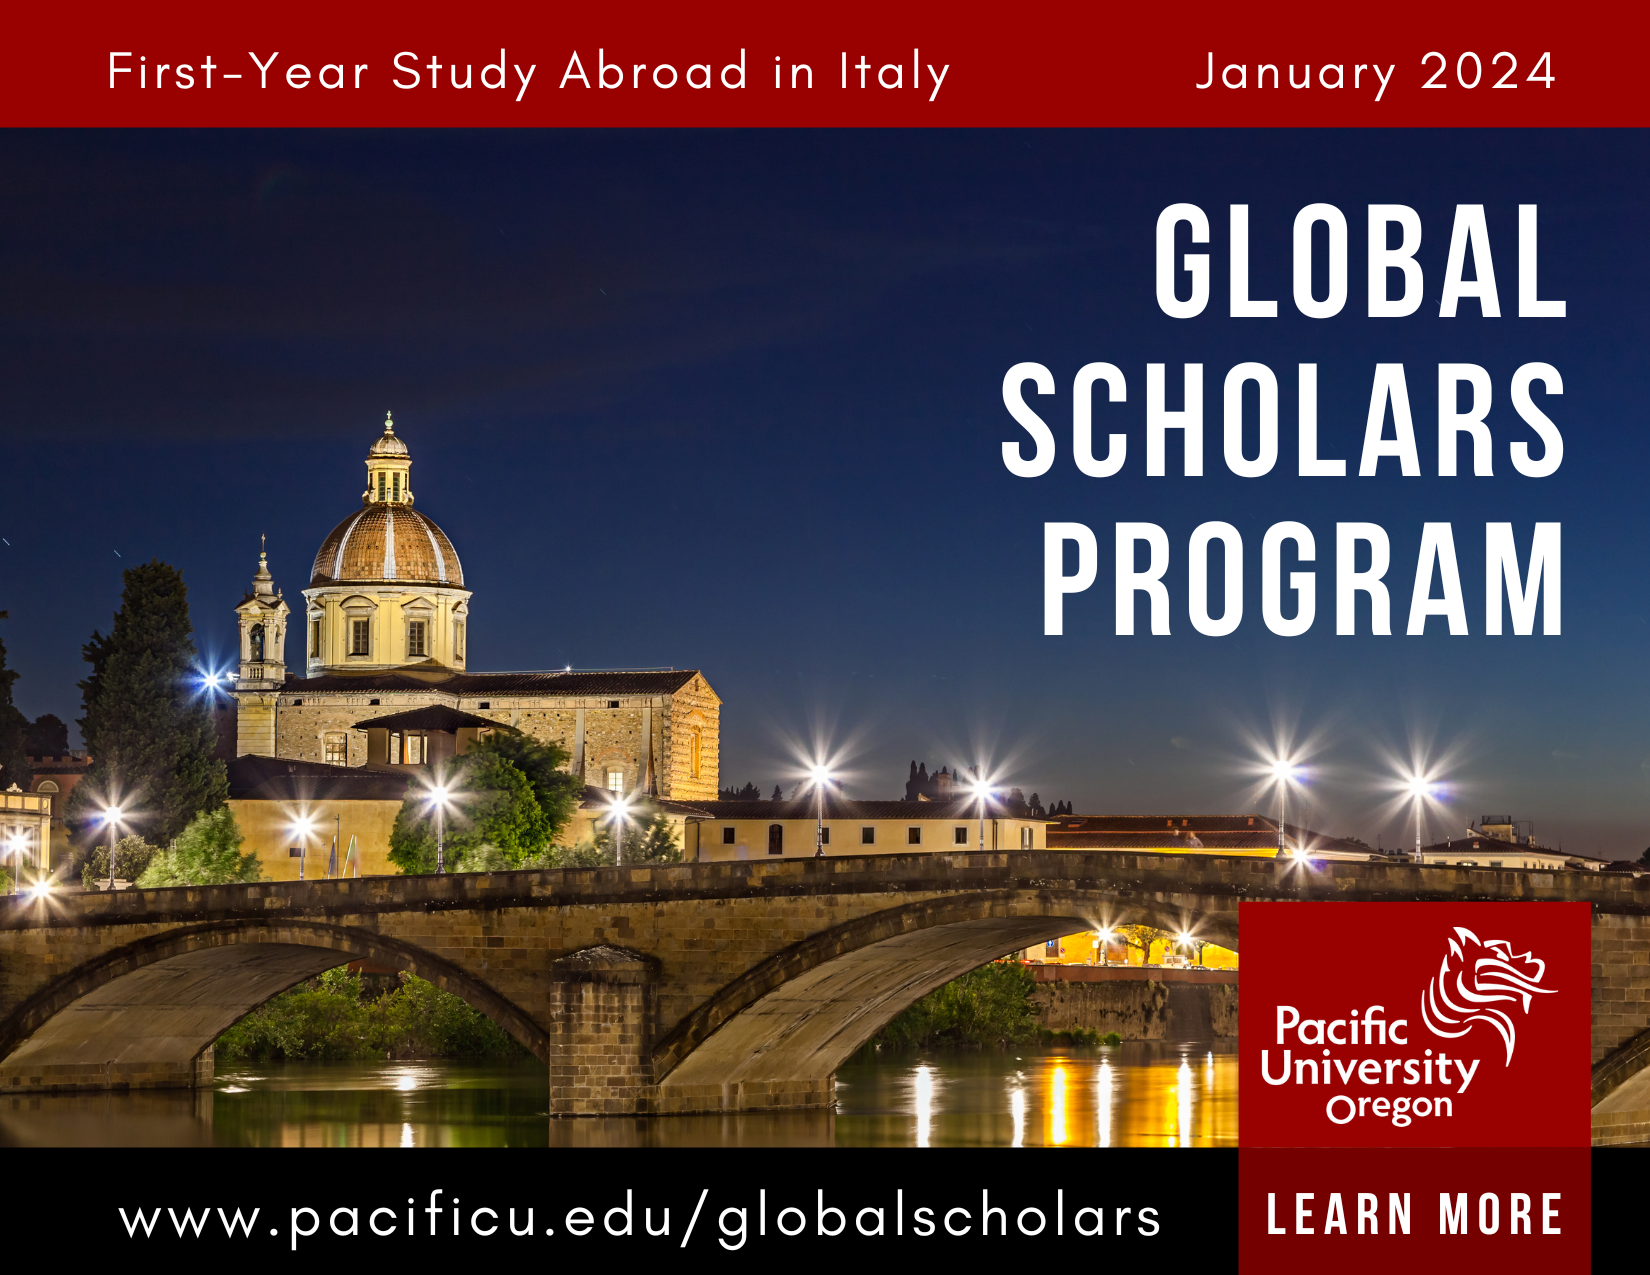 2023 First Year Study Abroad in Florence Italy